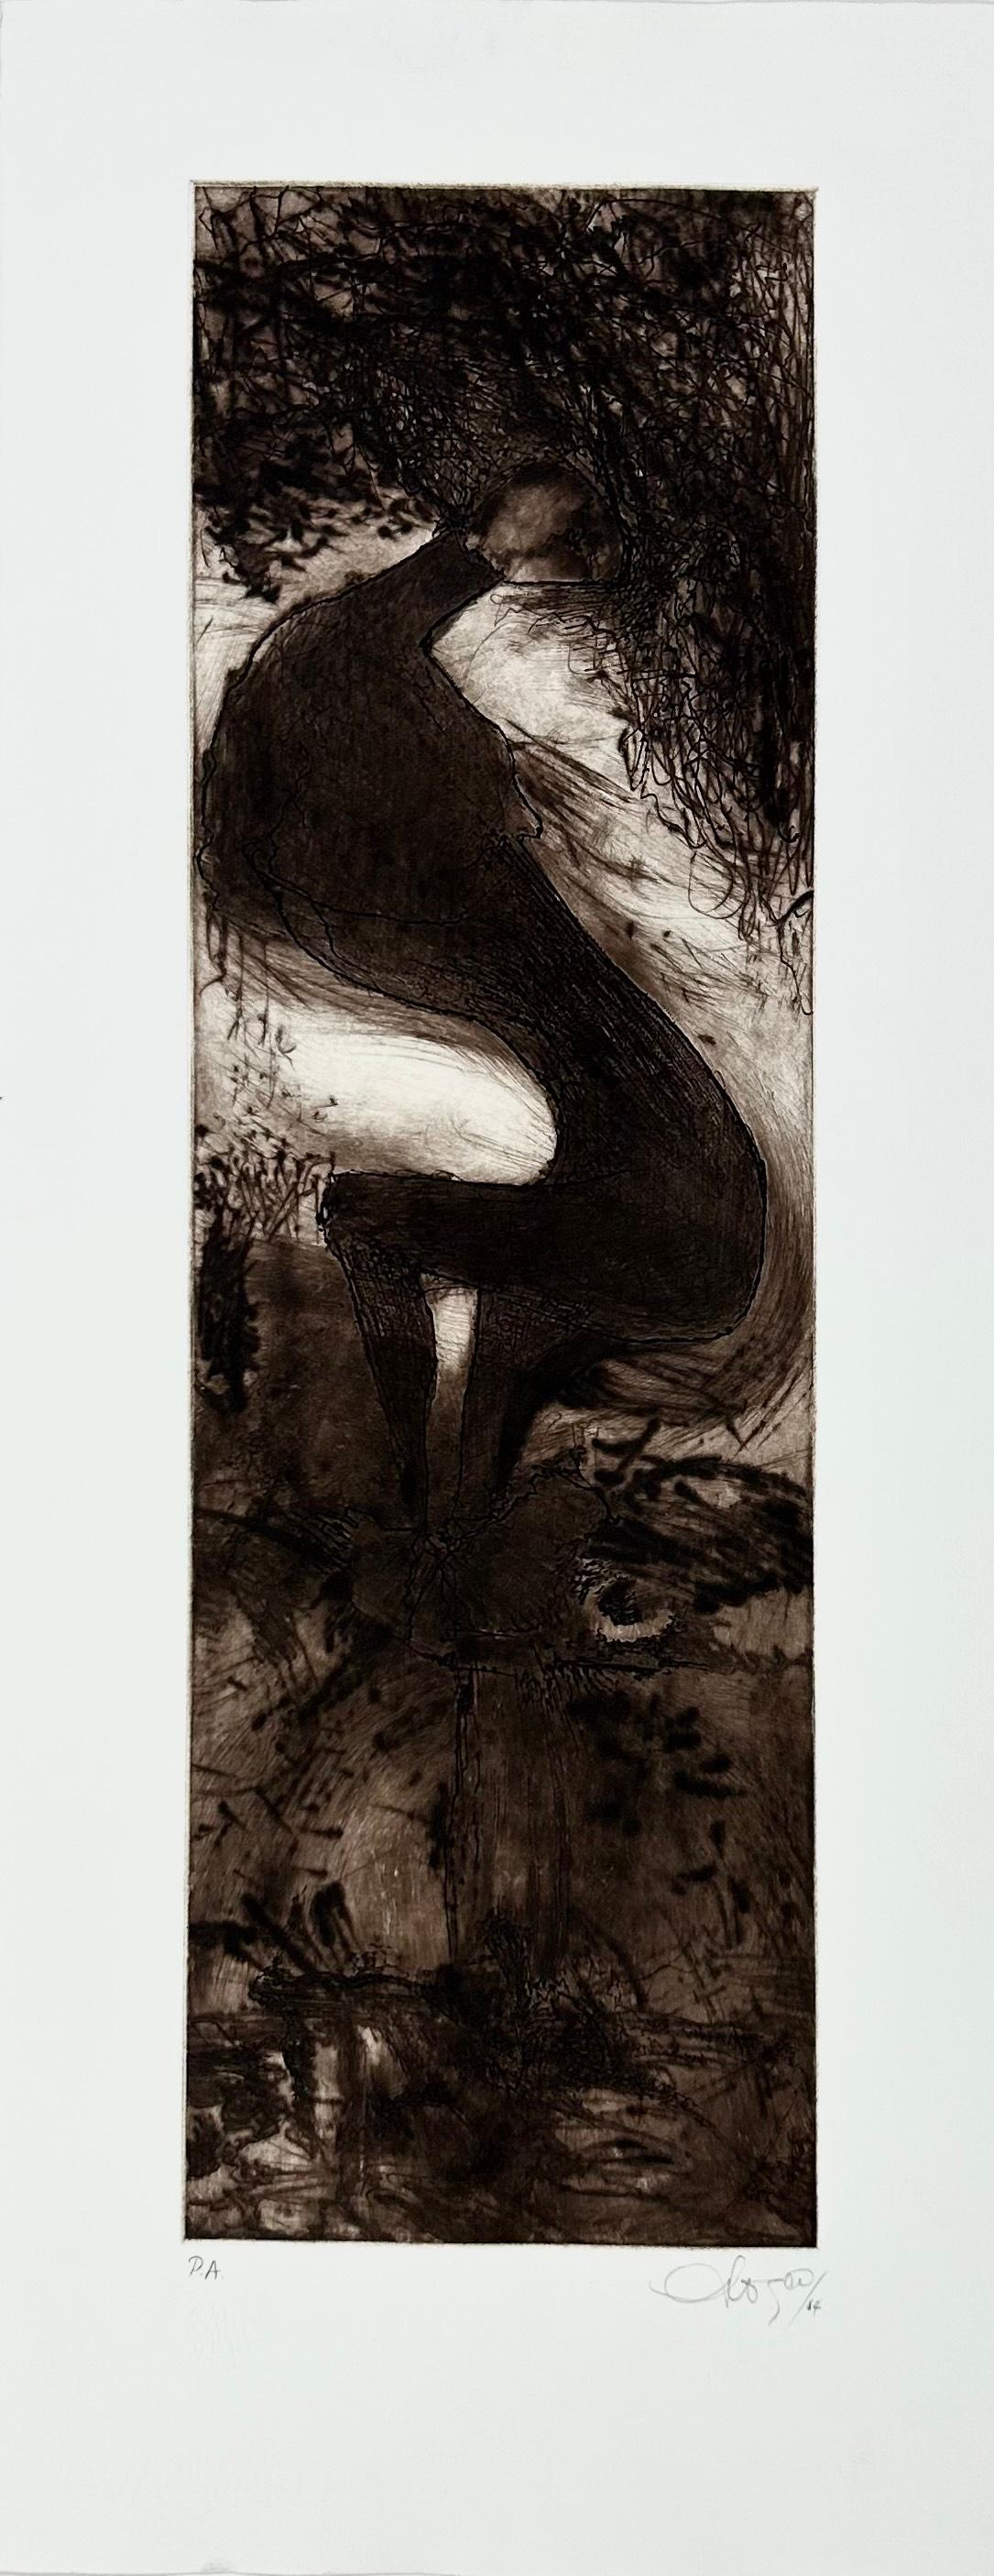 Raimundo Orozco (Cuba, 1949)
'Untitled', 2004
dry point on paper Guarro Biblos 250g.
29.7 x 12 in. (75.2 x 30.4 cm.)
Edition of 30
ID: ORO-306-2
Hand-signed by author